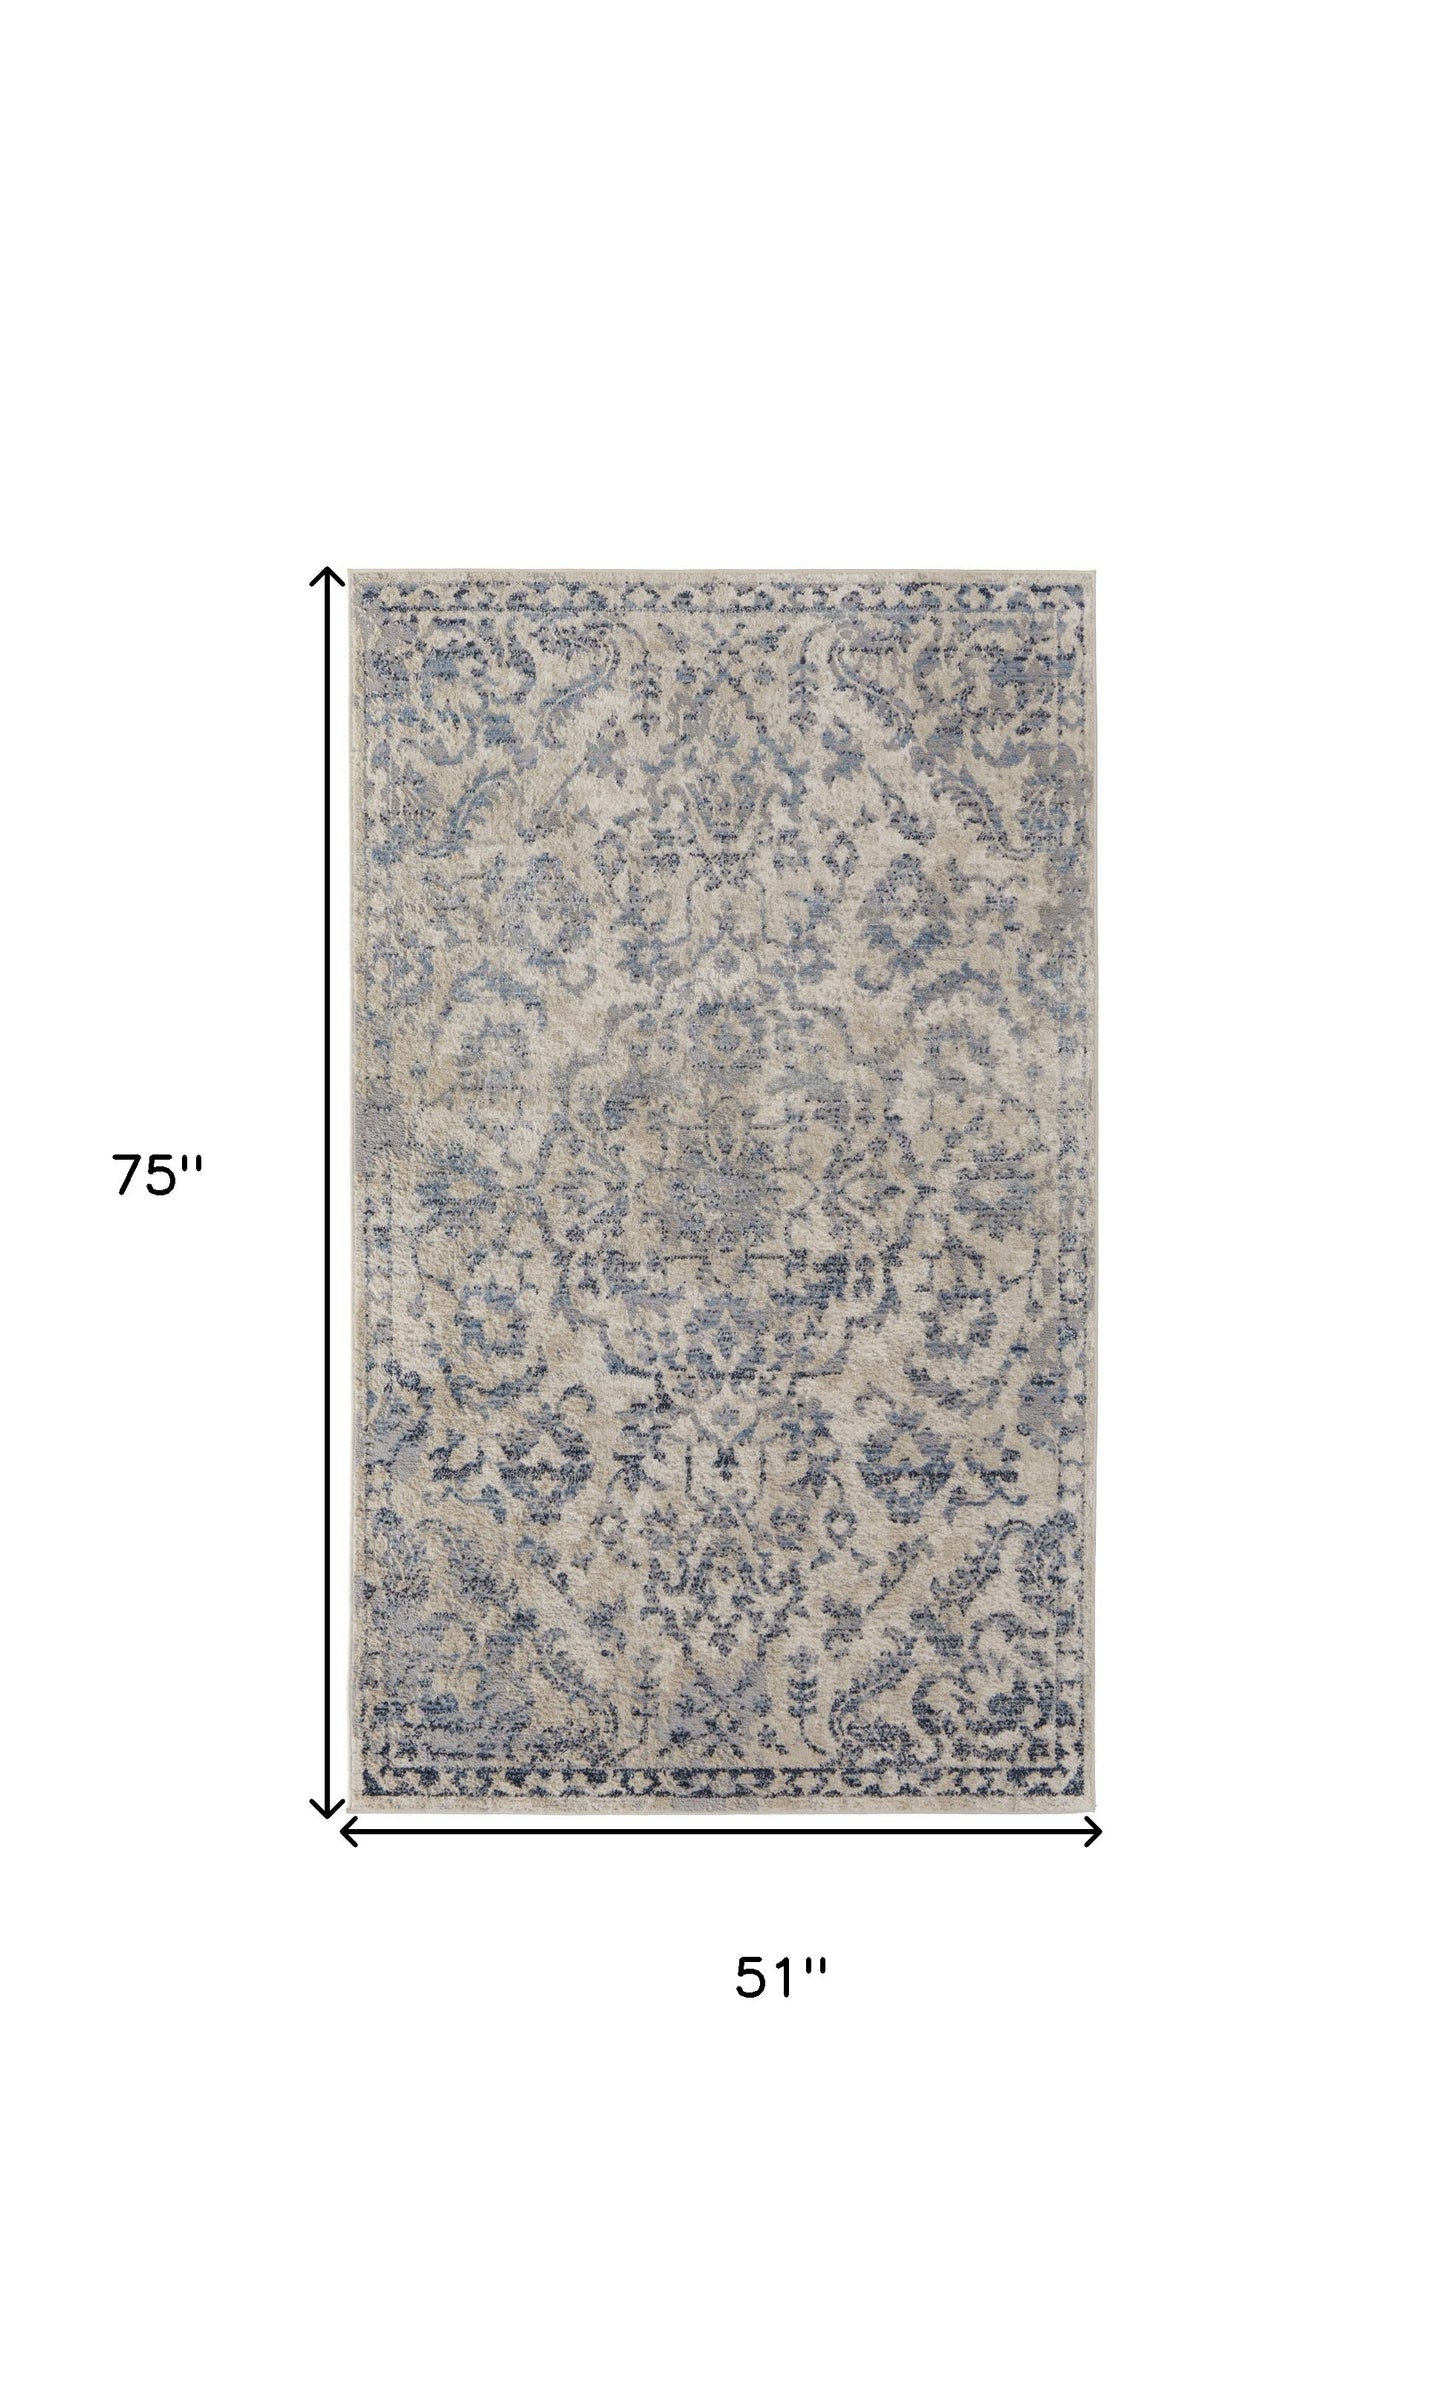 4' X 6' Gray Ivory And Gold Floral Power Loom Distressed Area Rug